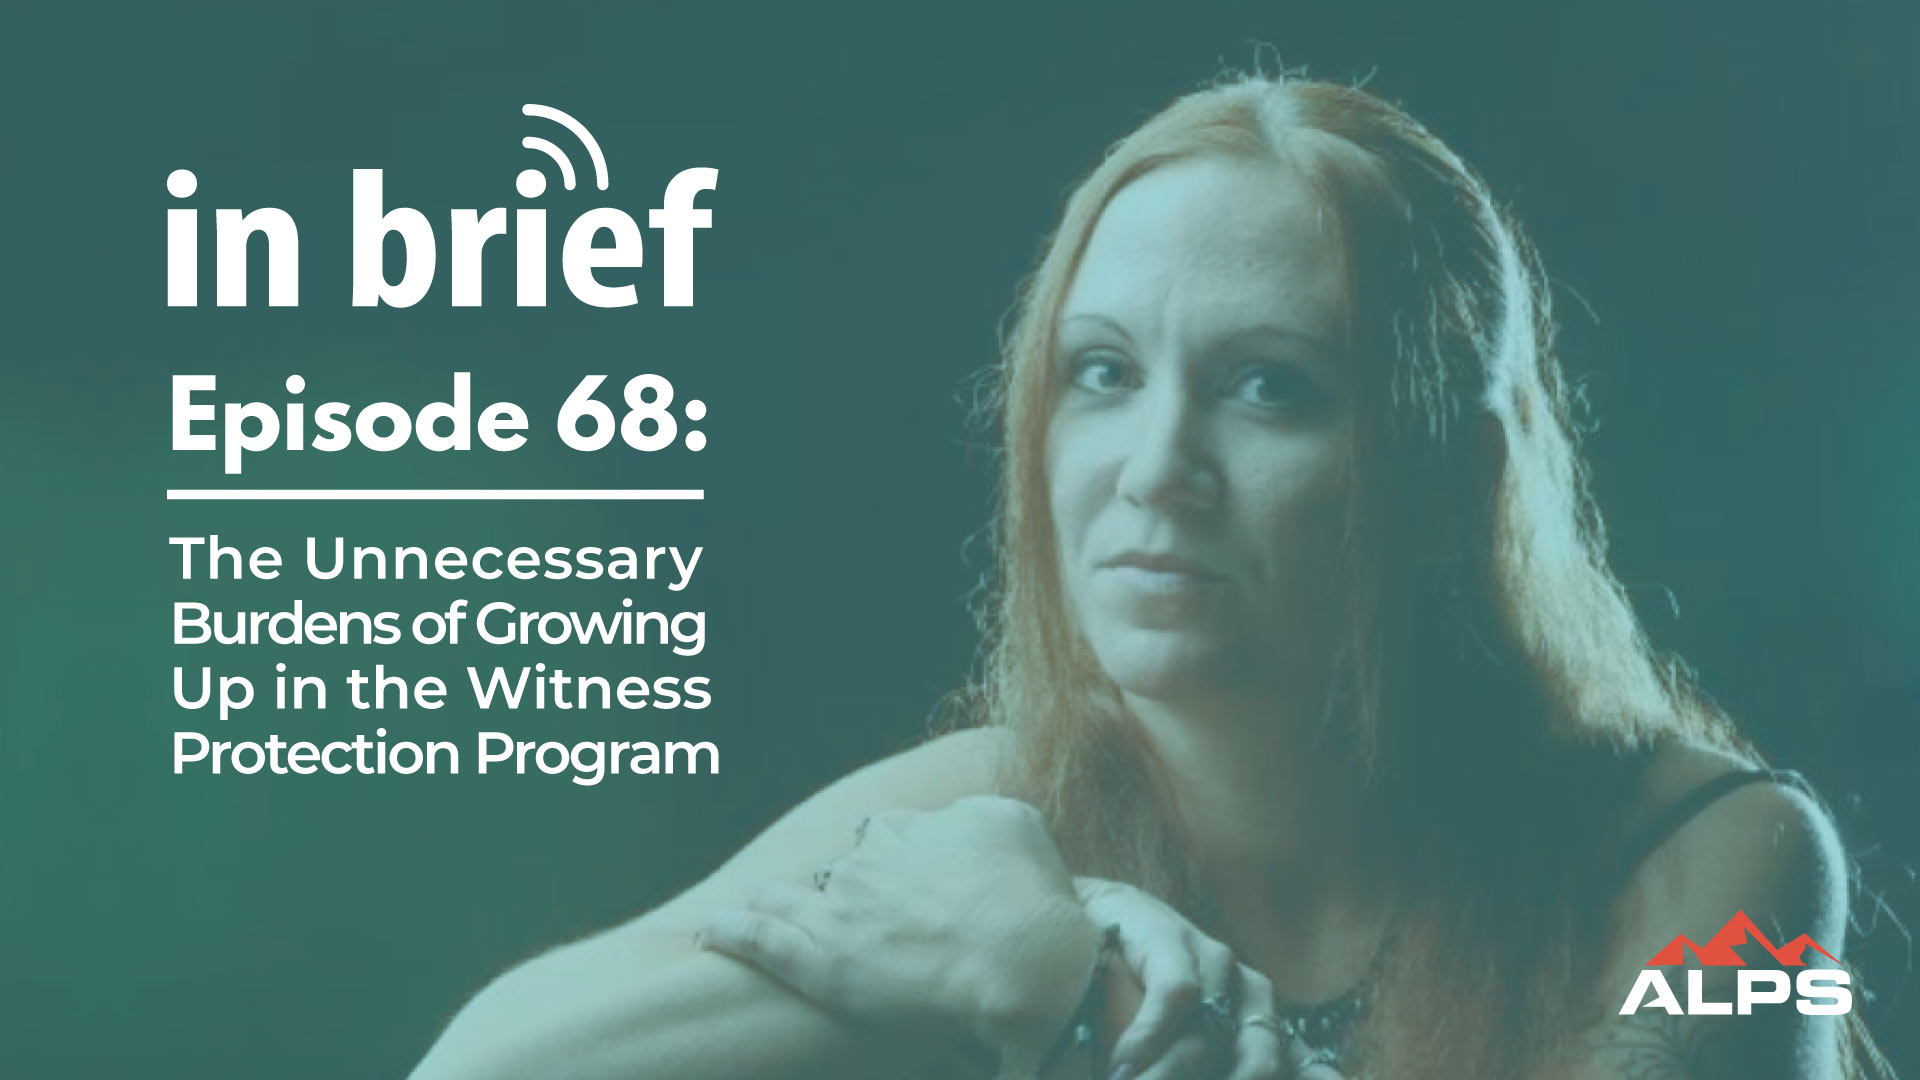 ALPS In Brief - Episode 68: The Unnecessary Burdens of Growing Up in the Witness Protection Program